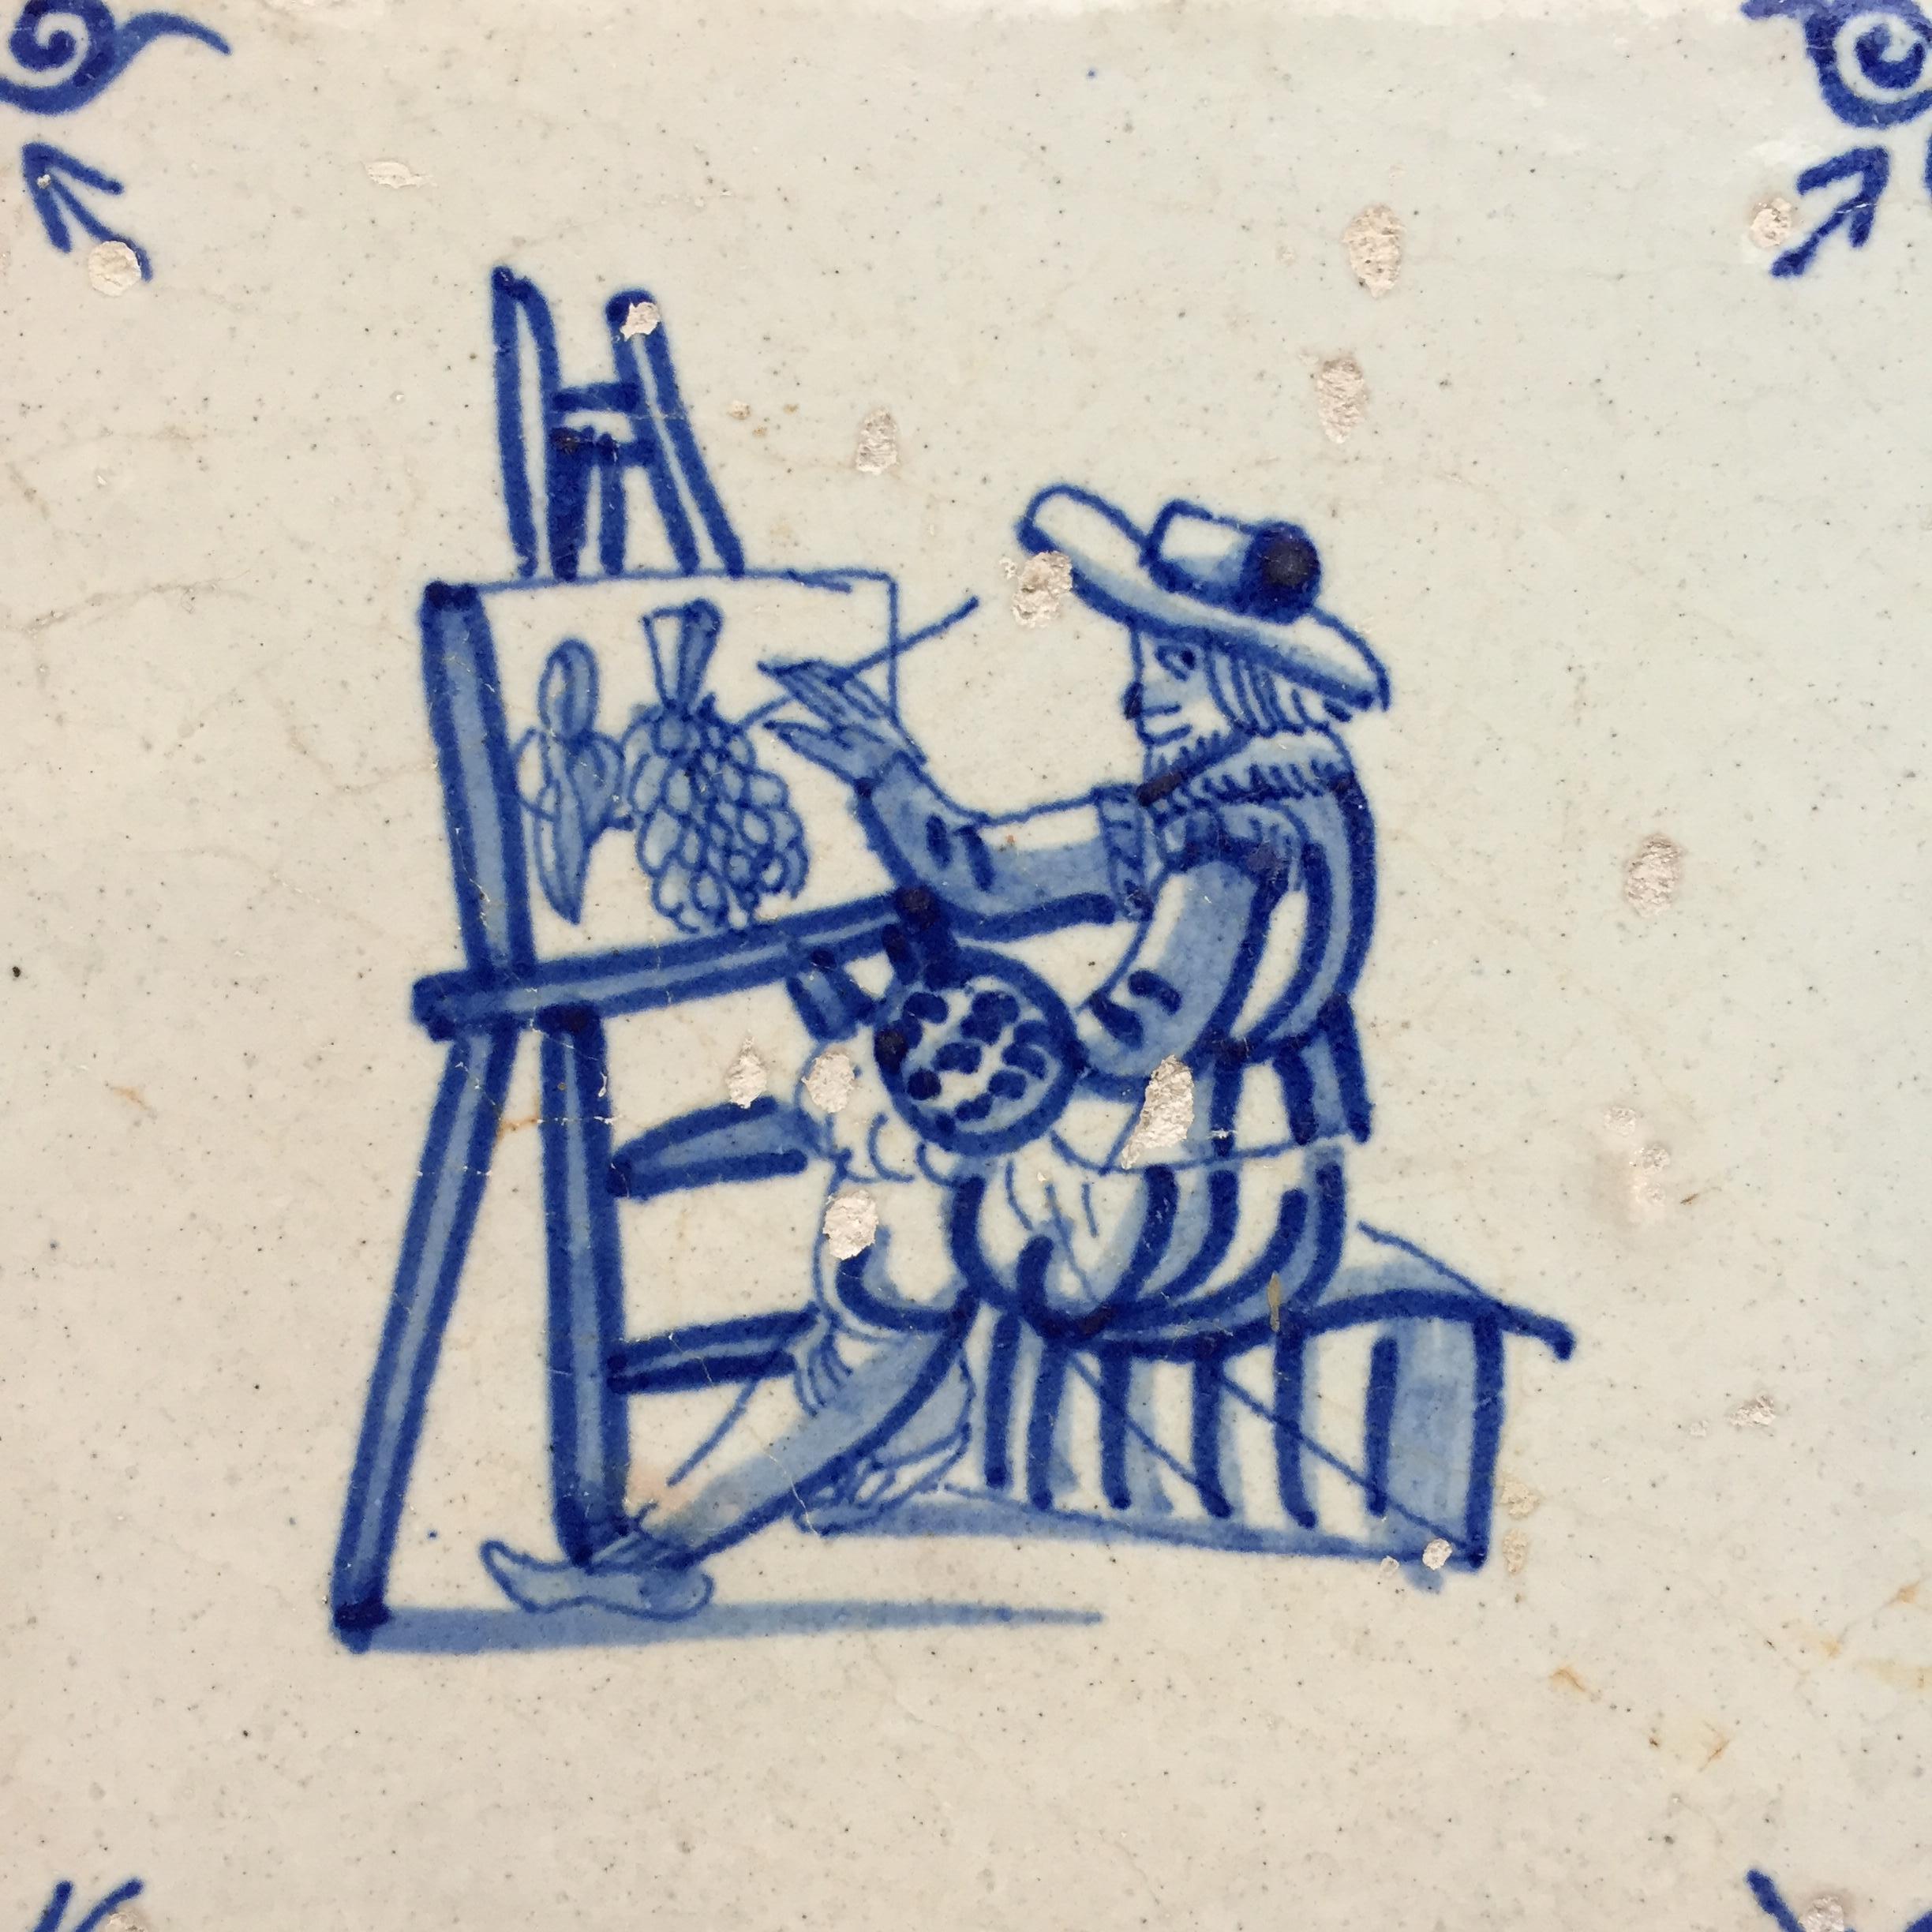 The Netherlands
Hoorn
Circa 1630 – 1660

A very rare and fine blue and white tile with the decoration of a painter in his workshop, painting a still life painting.
Very nice details of the painter his easel and his painting.
A Dutch master painter